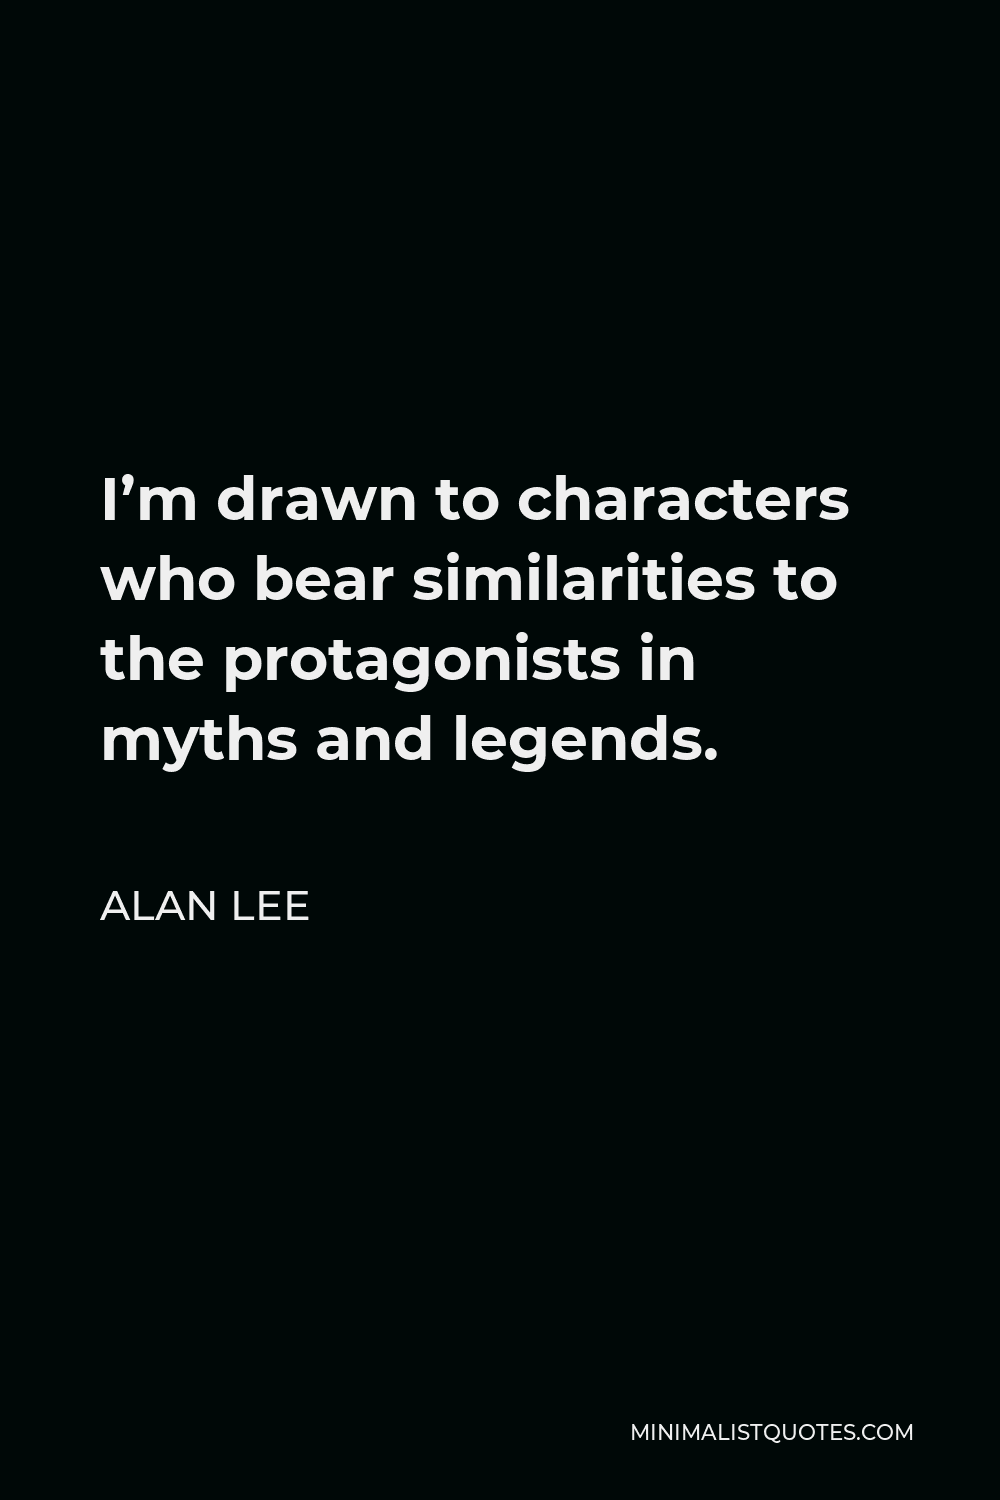 Alan Lee Quote - I’m drawn to characters who bear similarities to the protagonists in myths and legends.